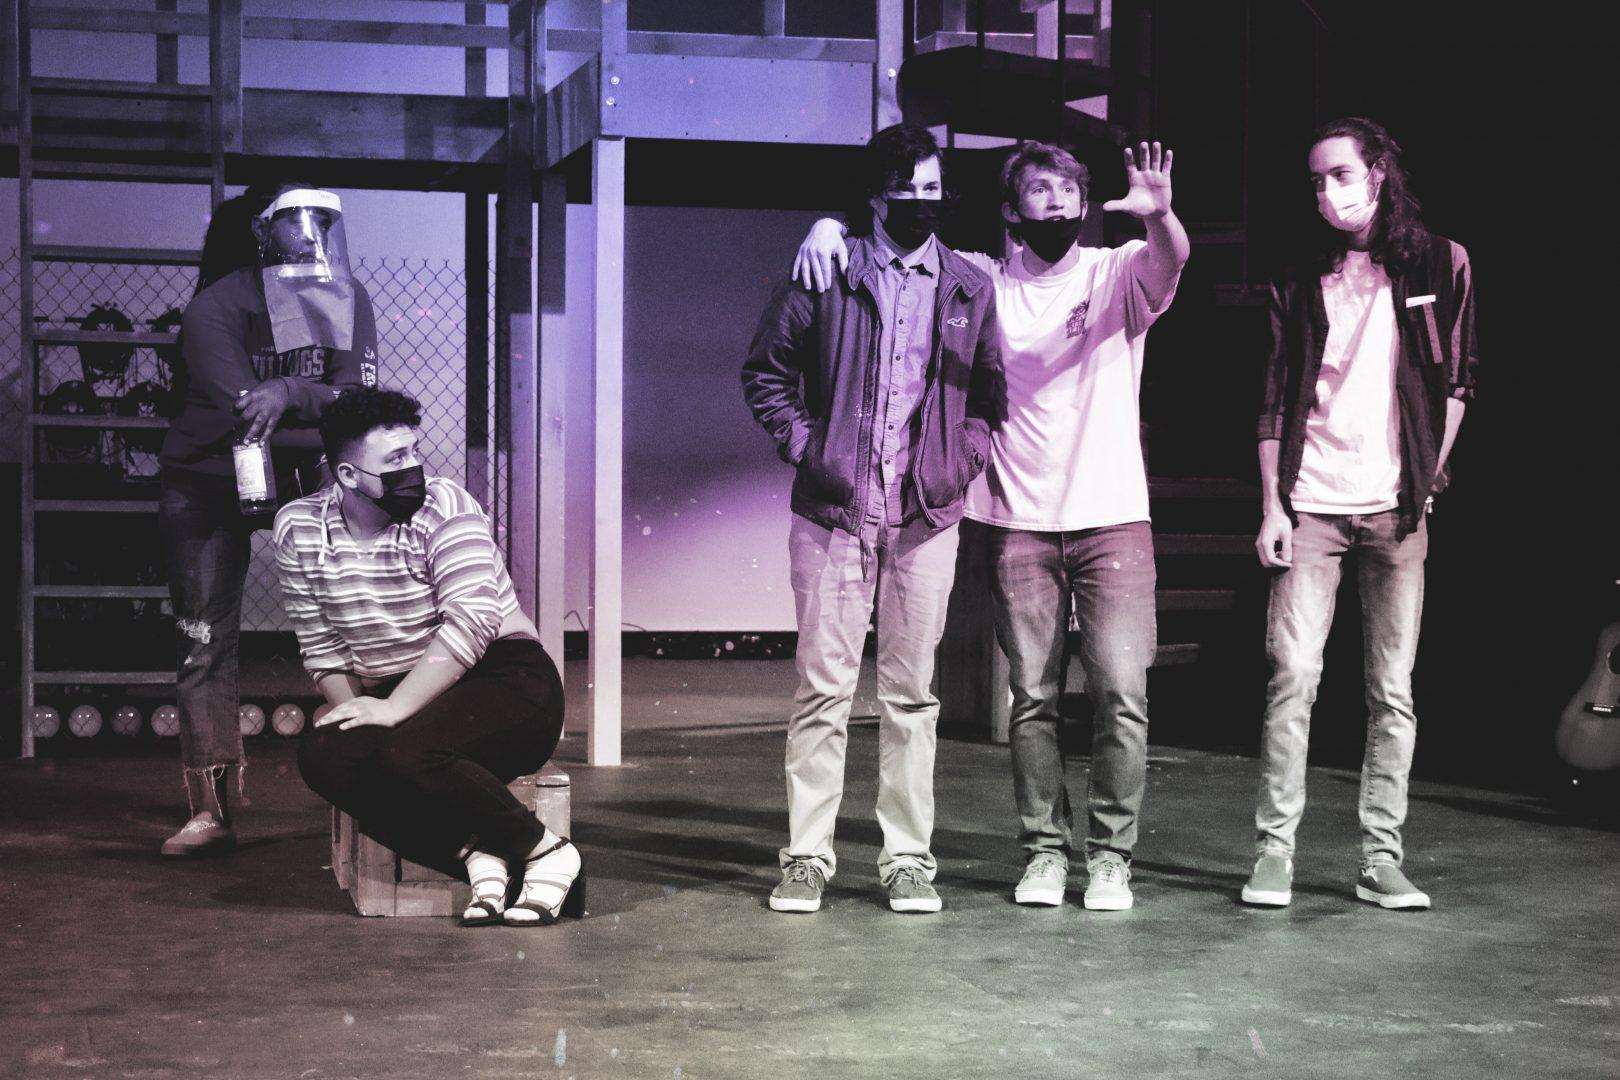 Cast members rehease for the upcoming production of Rent. (Courtesy of Miguel Gastelum)